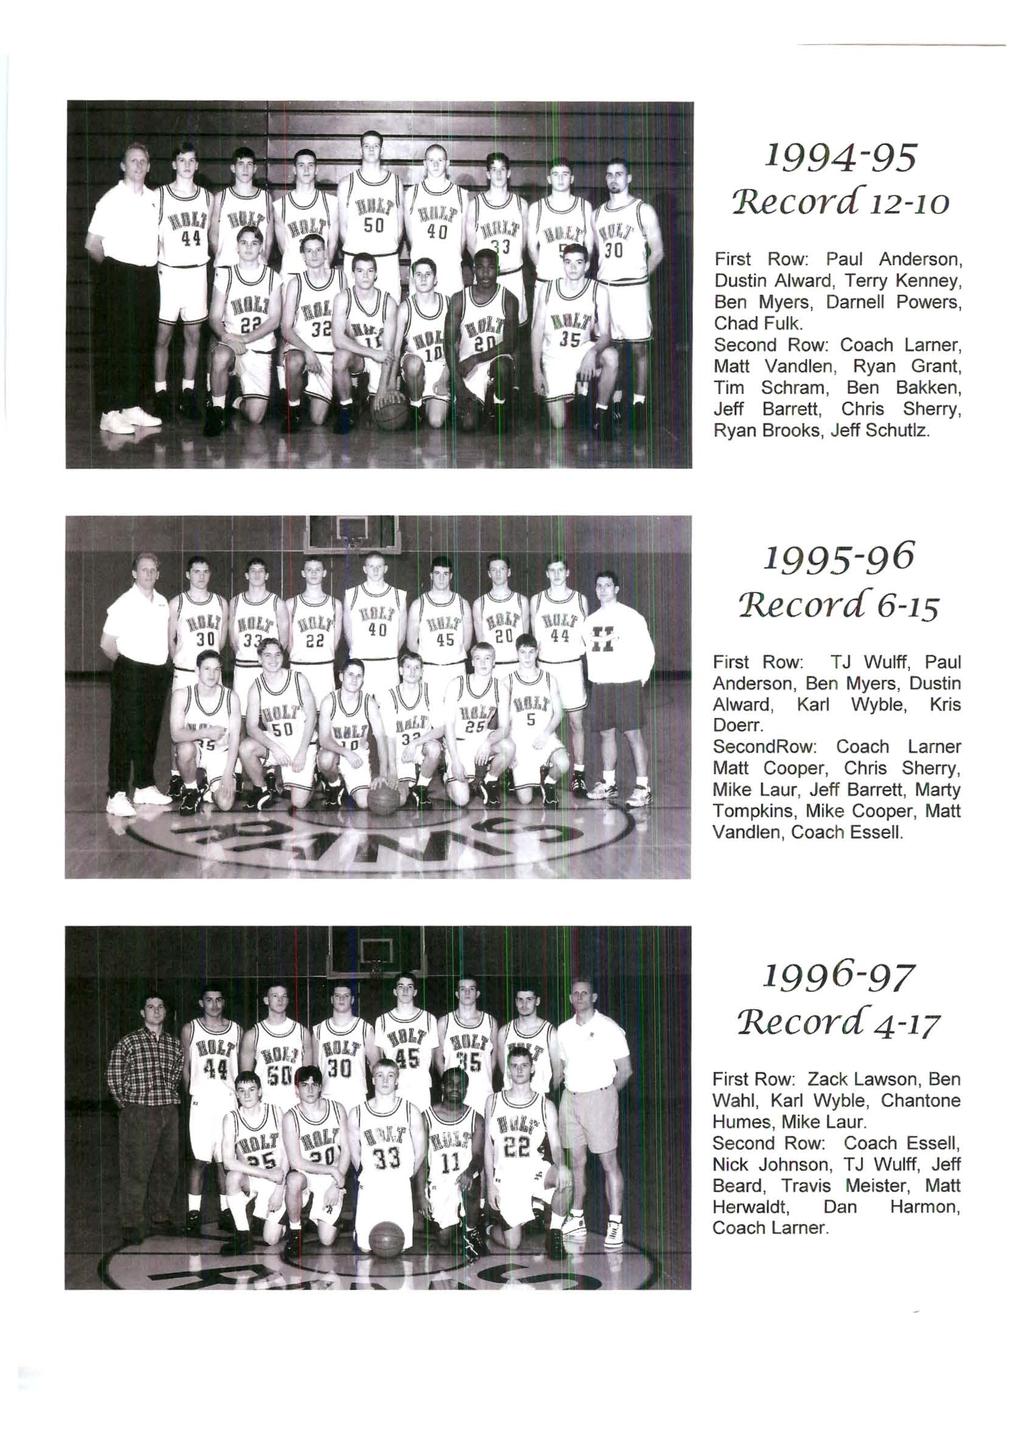 1994-95 Record 12-10 First Row: Paul Anderson, Dustin Alward, Terry Kenney, Ben Myers, Darnell Powers, Chad Fulk.